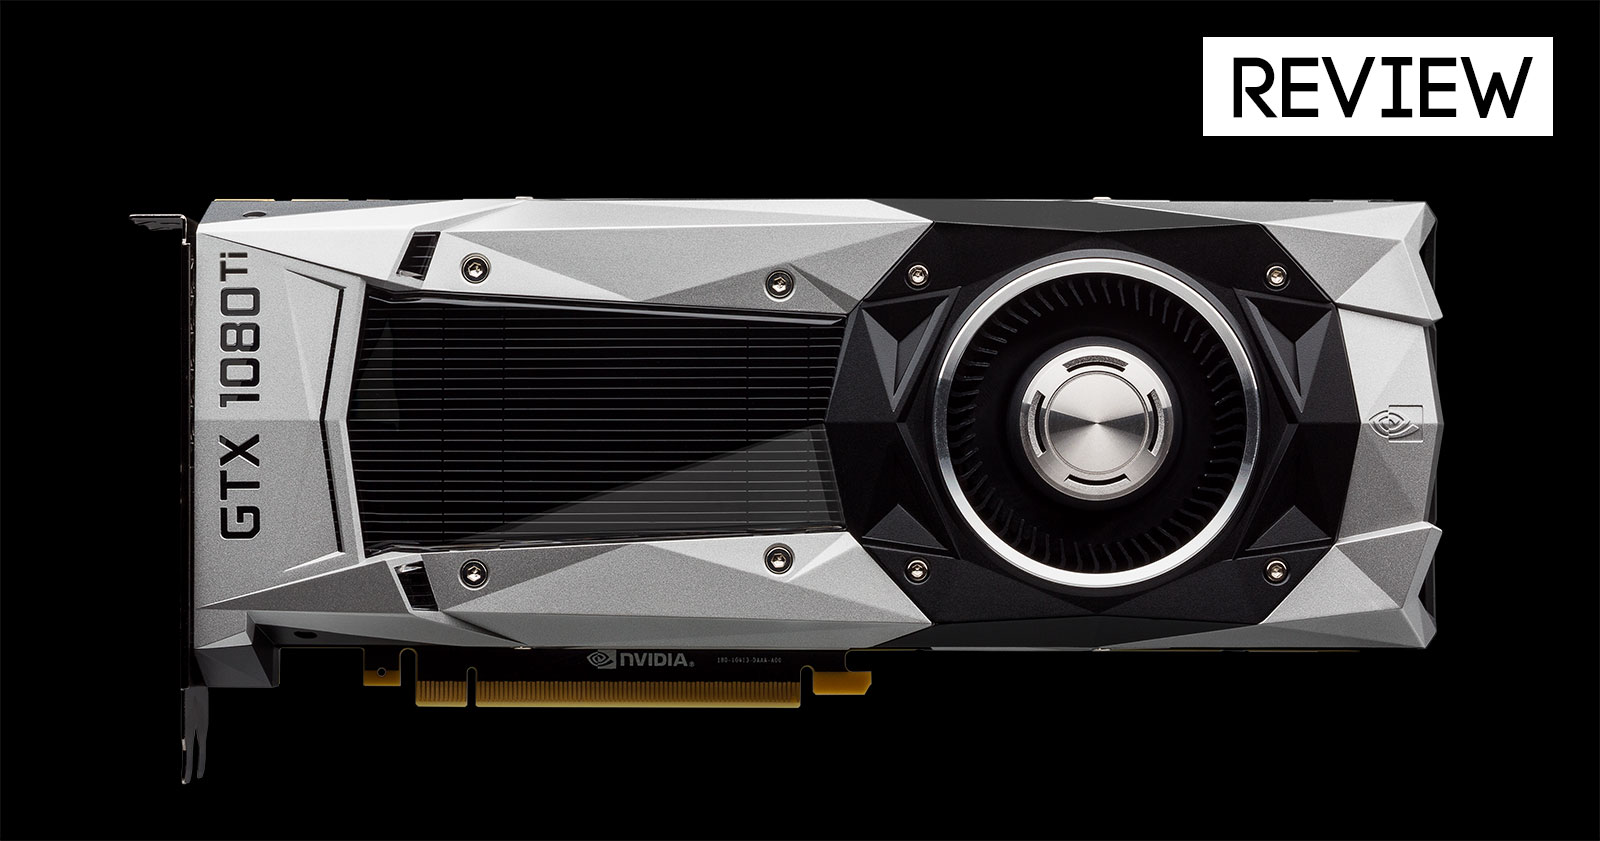 Nvidia GeForce GTX 1080 Ti benchmarks: 4K/60 is within reach